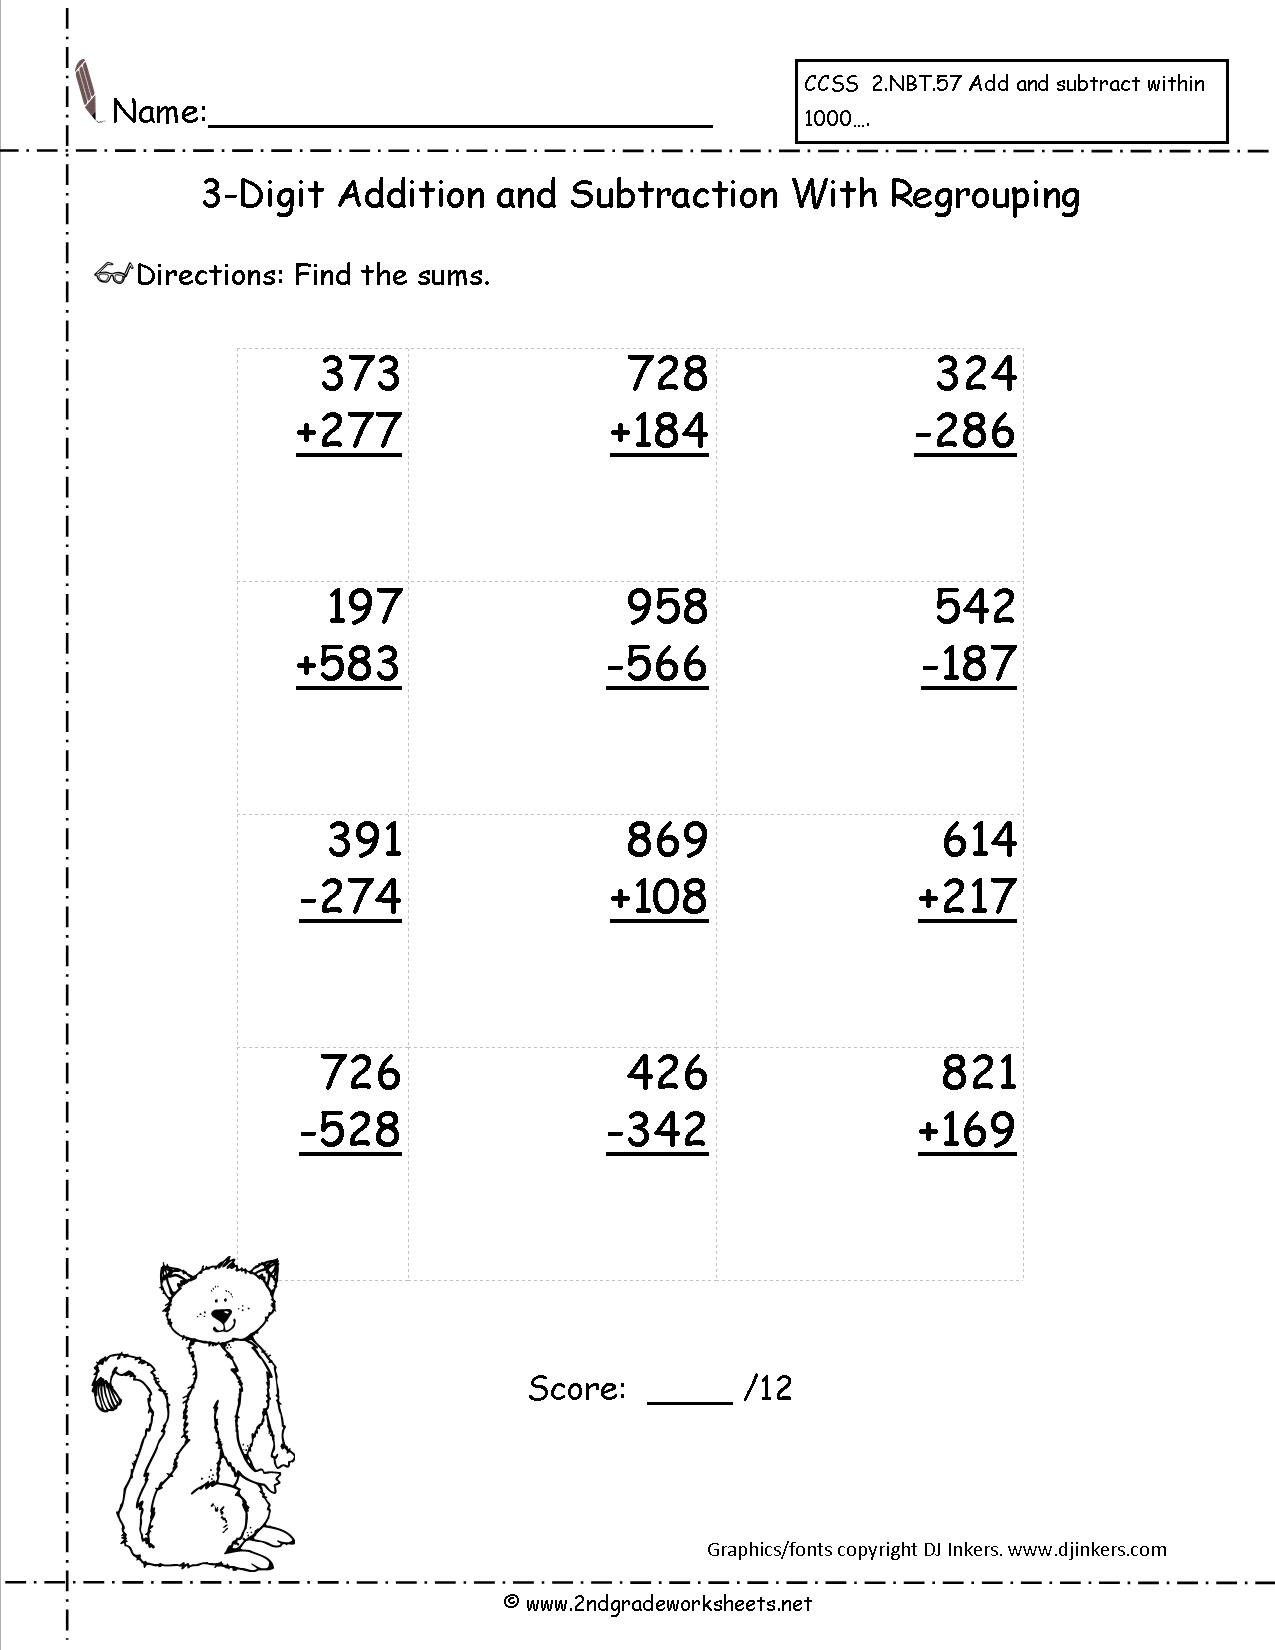 2nd Grade Math Worksheets 3 Digit Subtraction With Regrouping Printable Double Digit